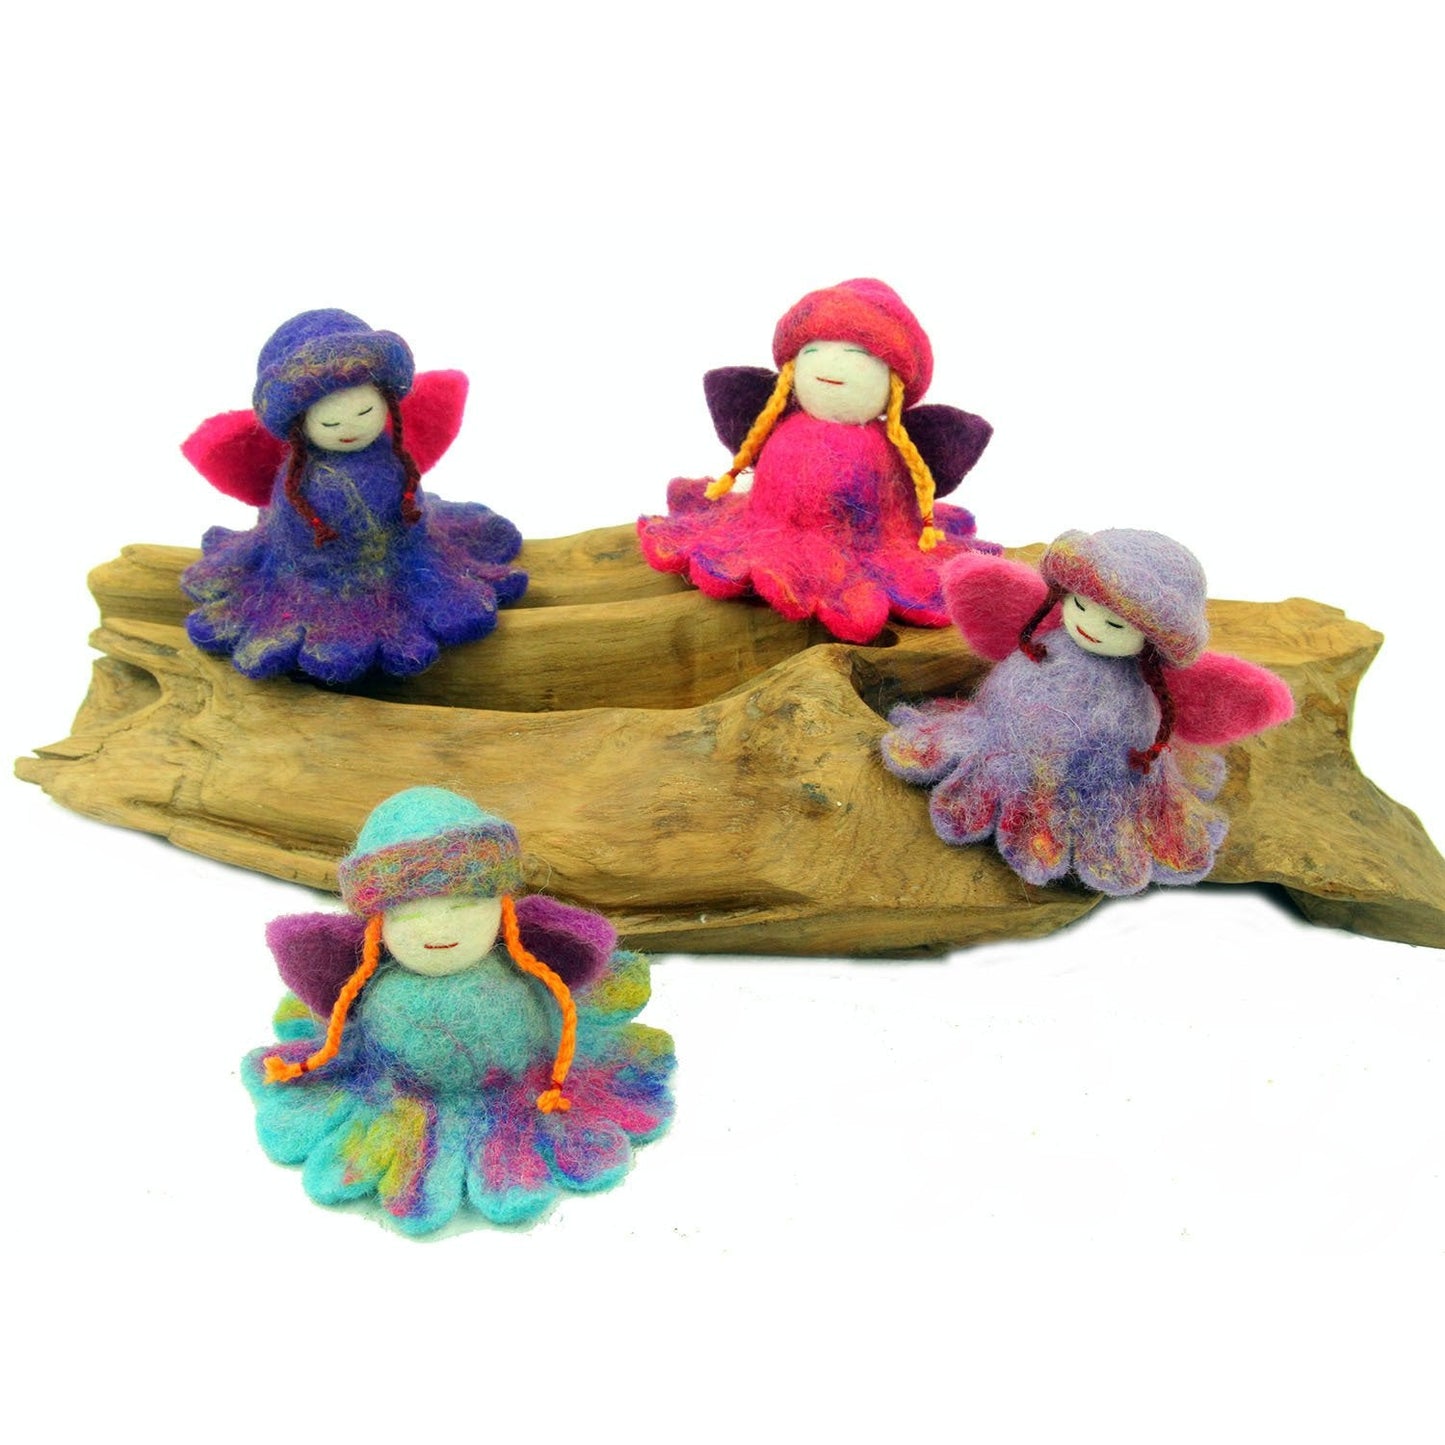 hand-felted-colorful-flower-fairies-set-of-4-global-groove